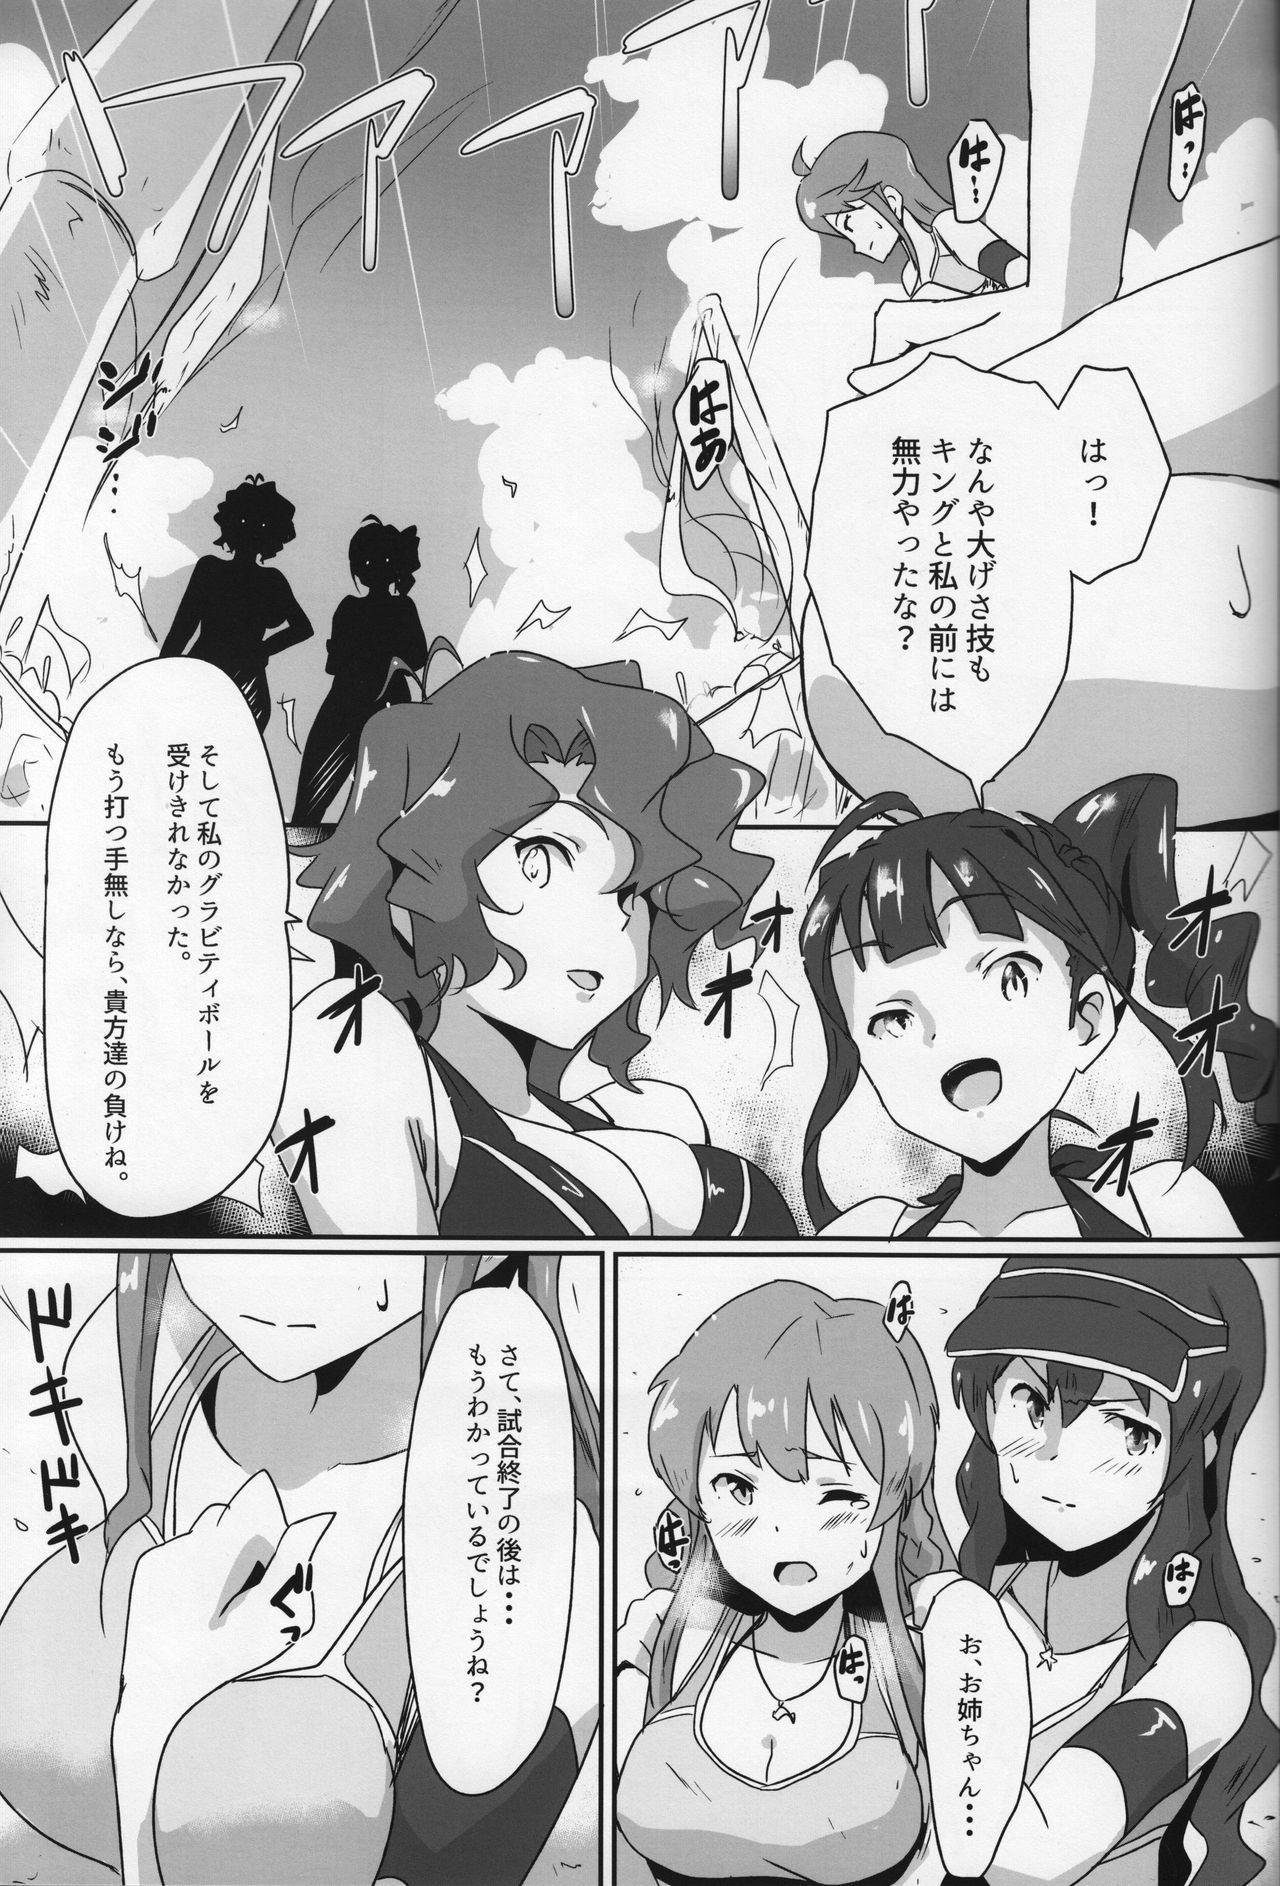 Nurugel Gang Bangs Volleyball!!! - The idolmaster Que - Page 2